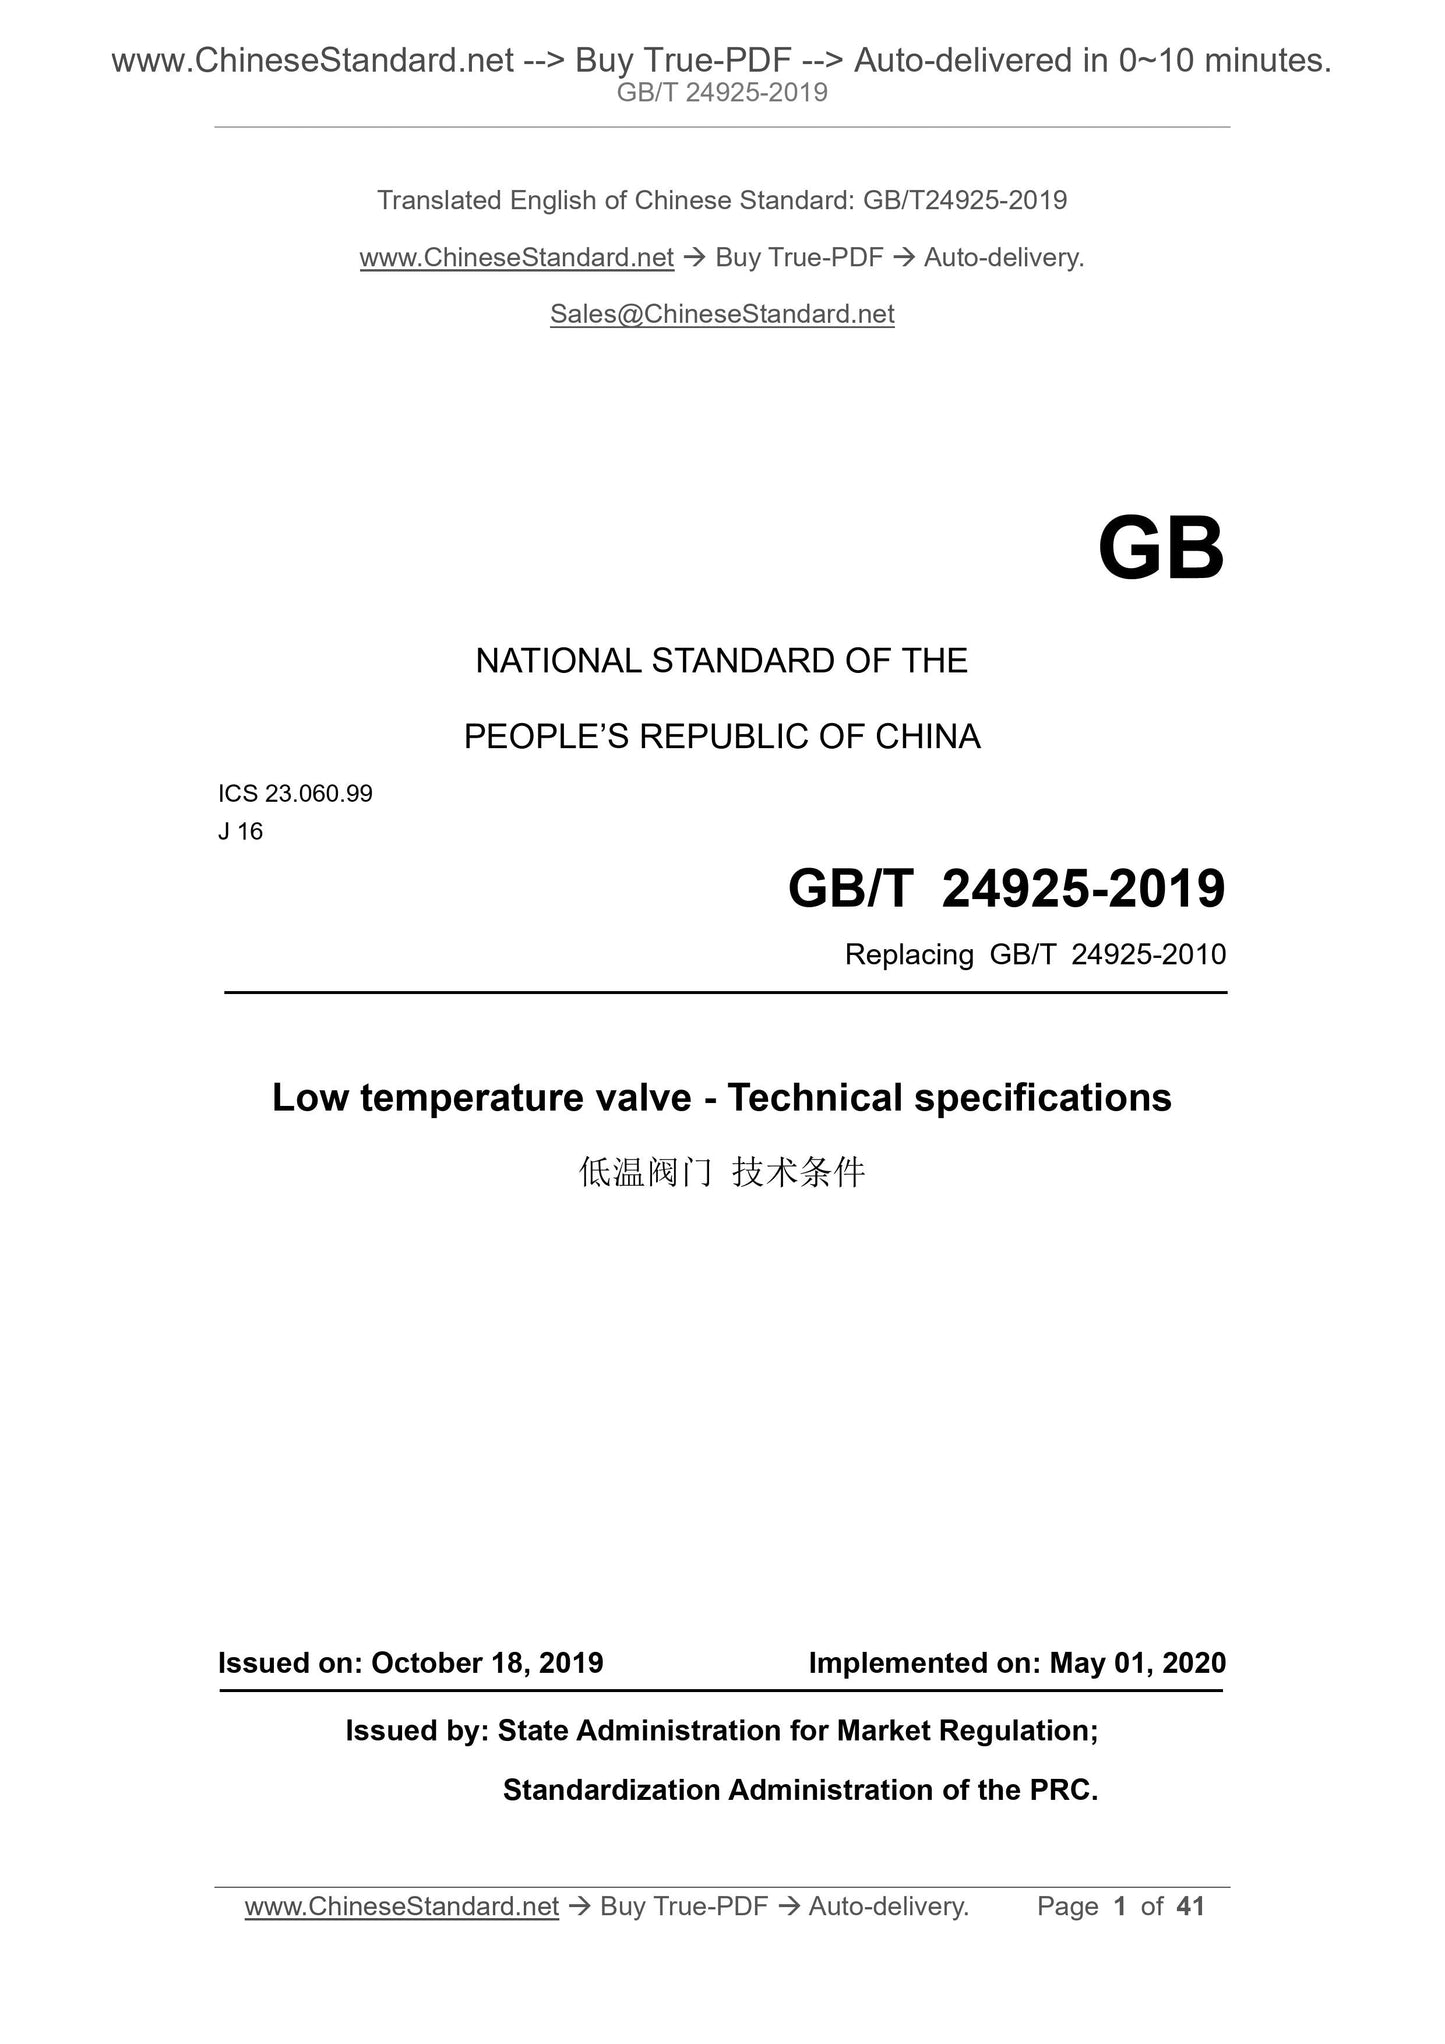 GB/T 24925-2019 Page 1